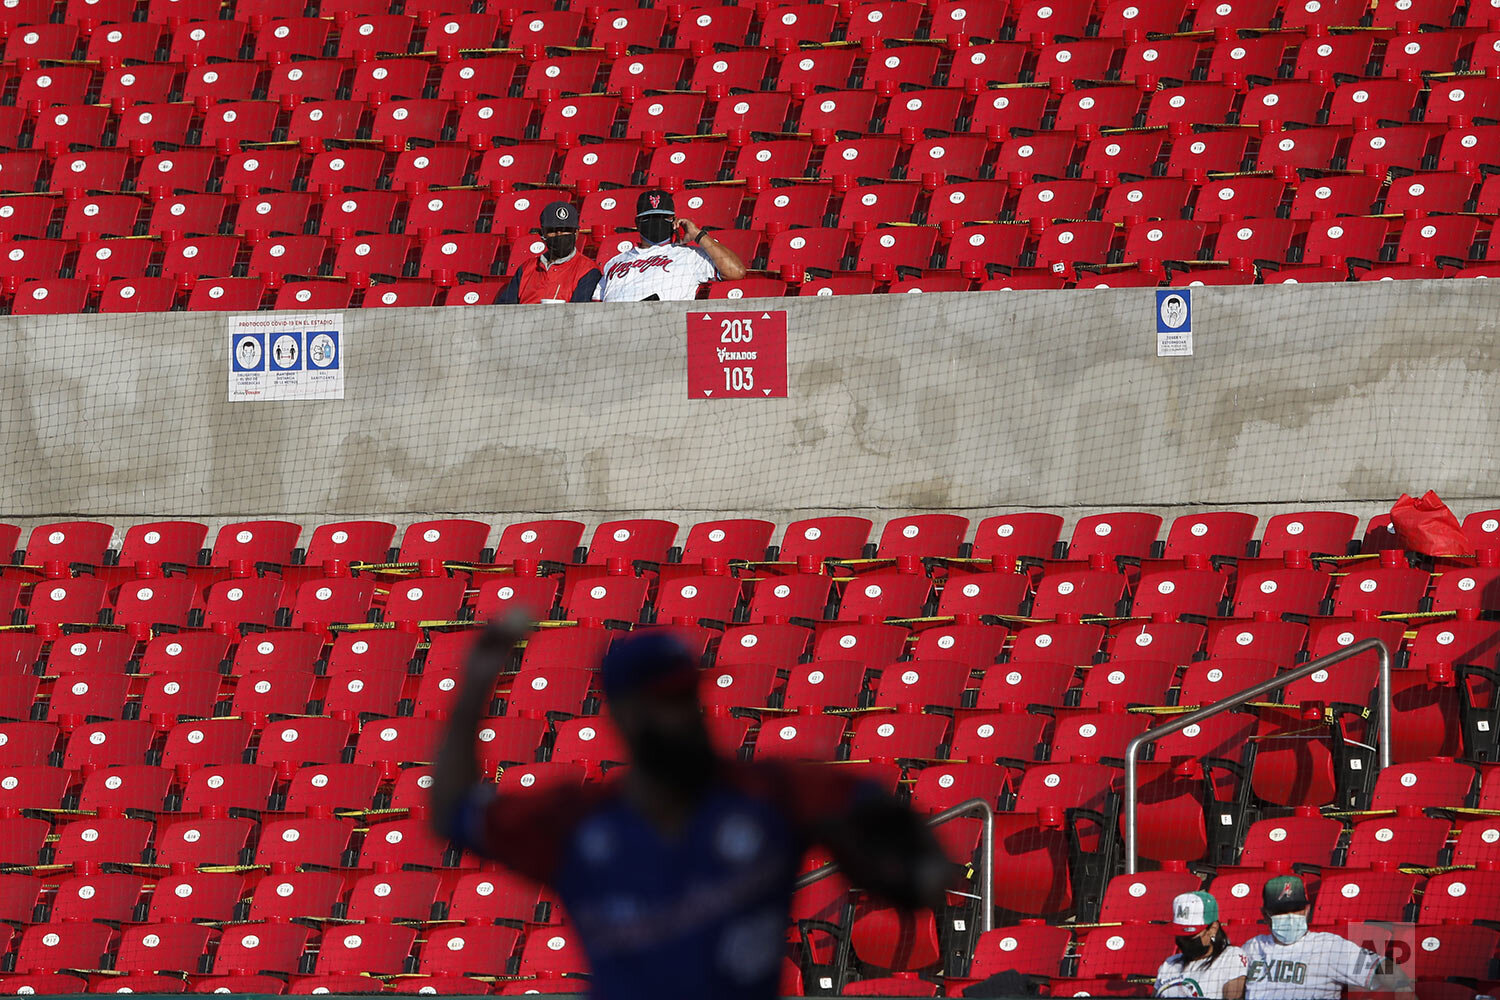  A few fans watch Dominican Republic's starting pitcher Joe Van Meter throw to a Panama batter in the fourth inning of a Caribbean Series baseball game in Mazatlan, Mexico, Feb. 2, 2021. (AP Photo/Moises Castillo) 